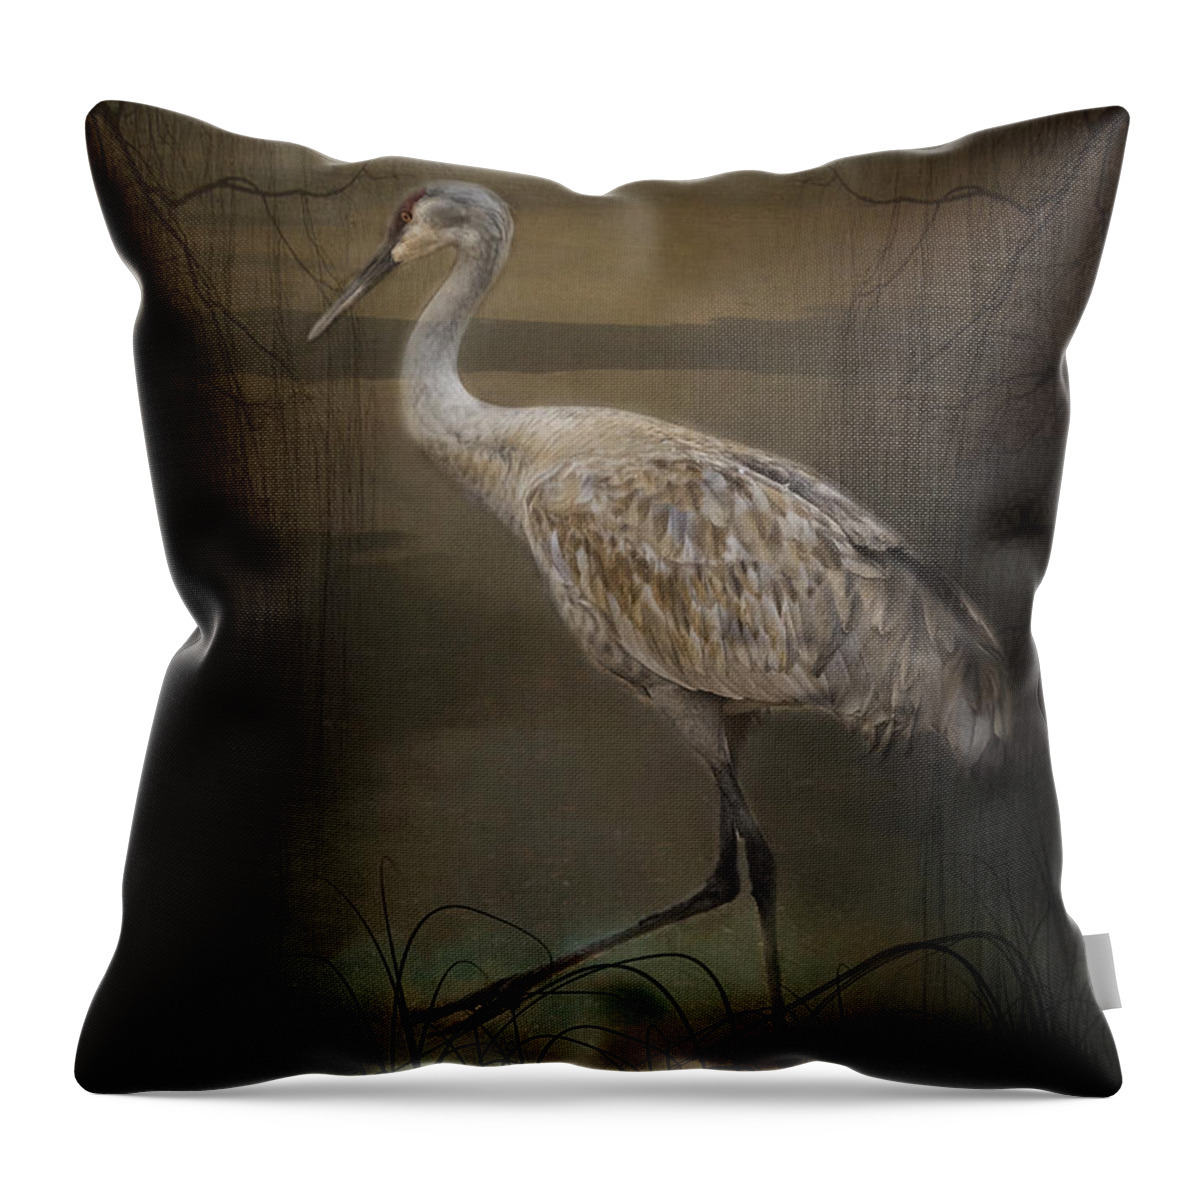 Wild Throw Pillow featuring the painting Oriental Sandhill Crane by Janice Pariza